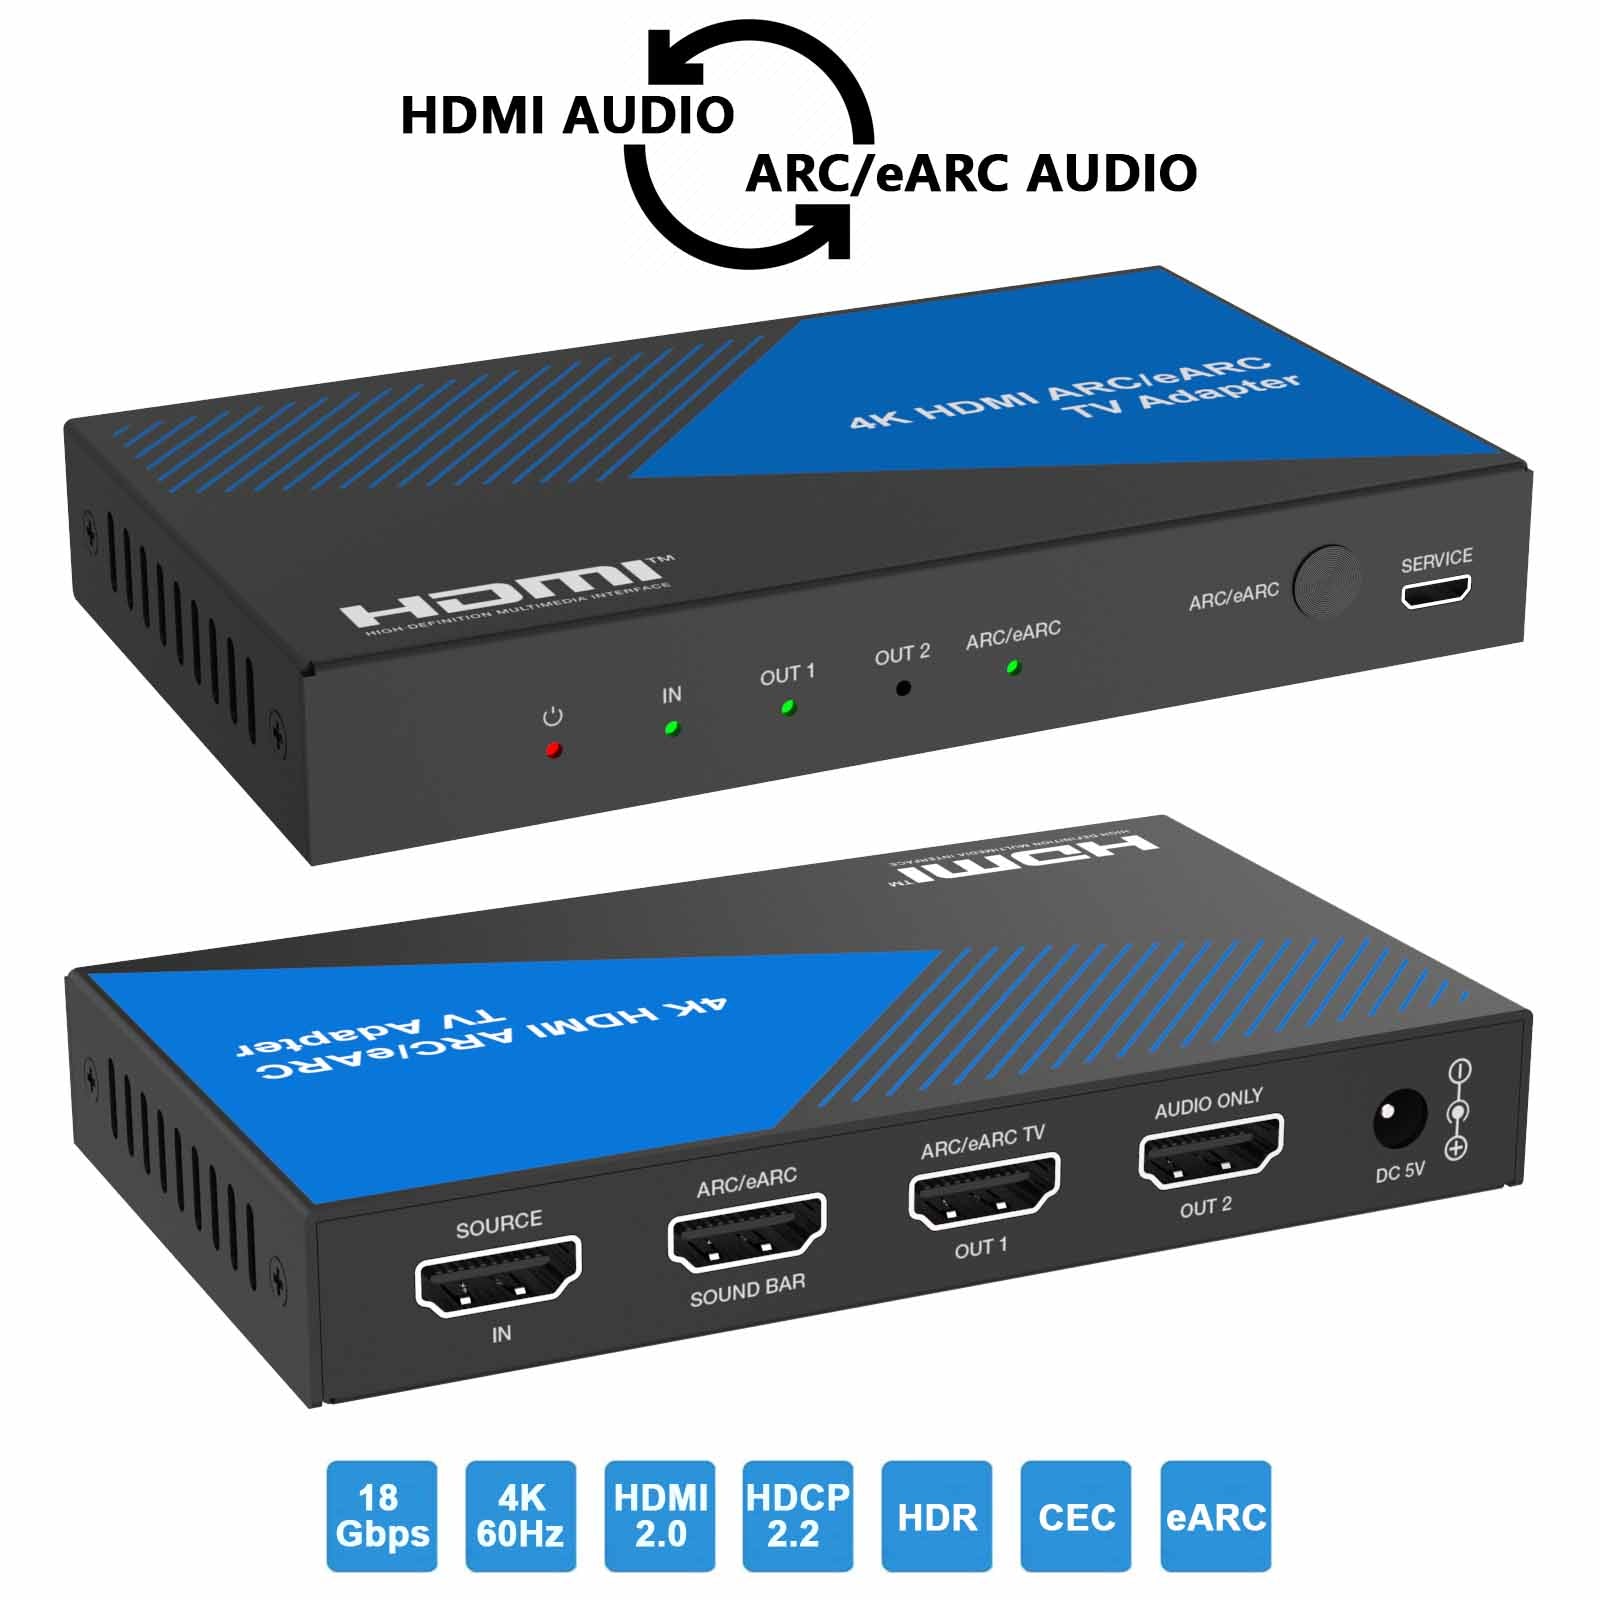 HDMI ARC and HDMI eARC: everything you need to know